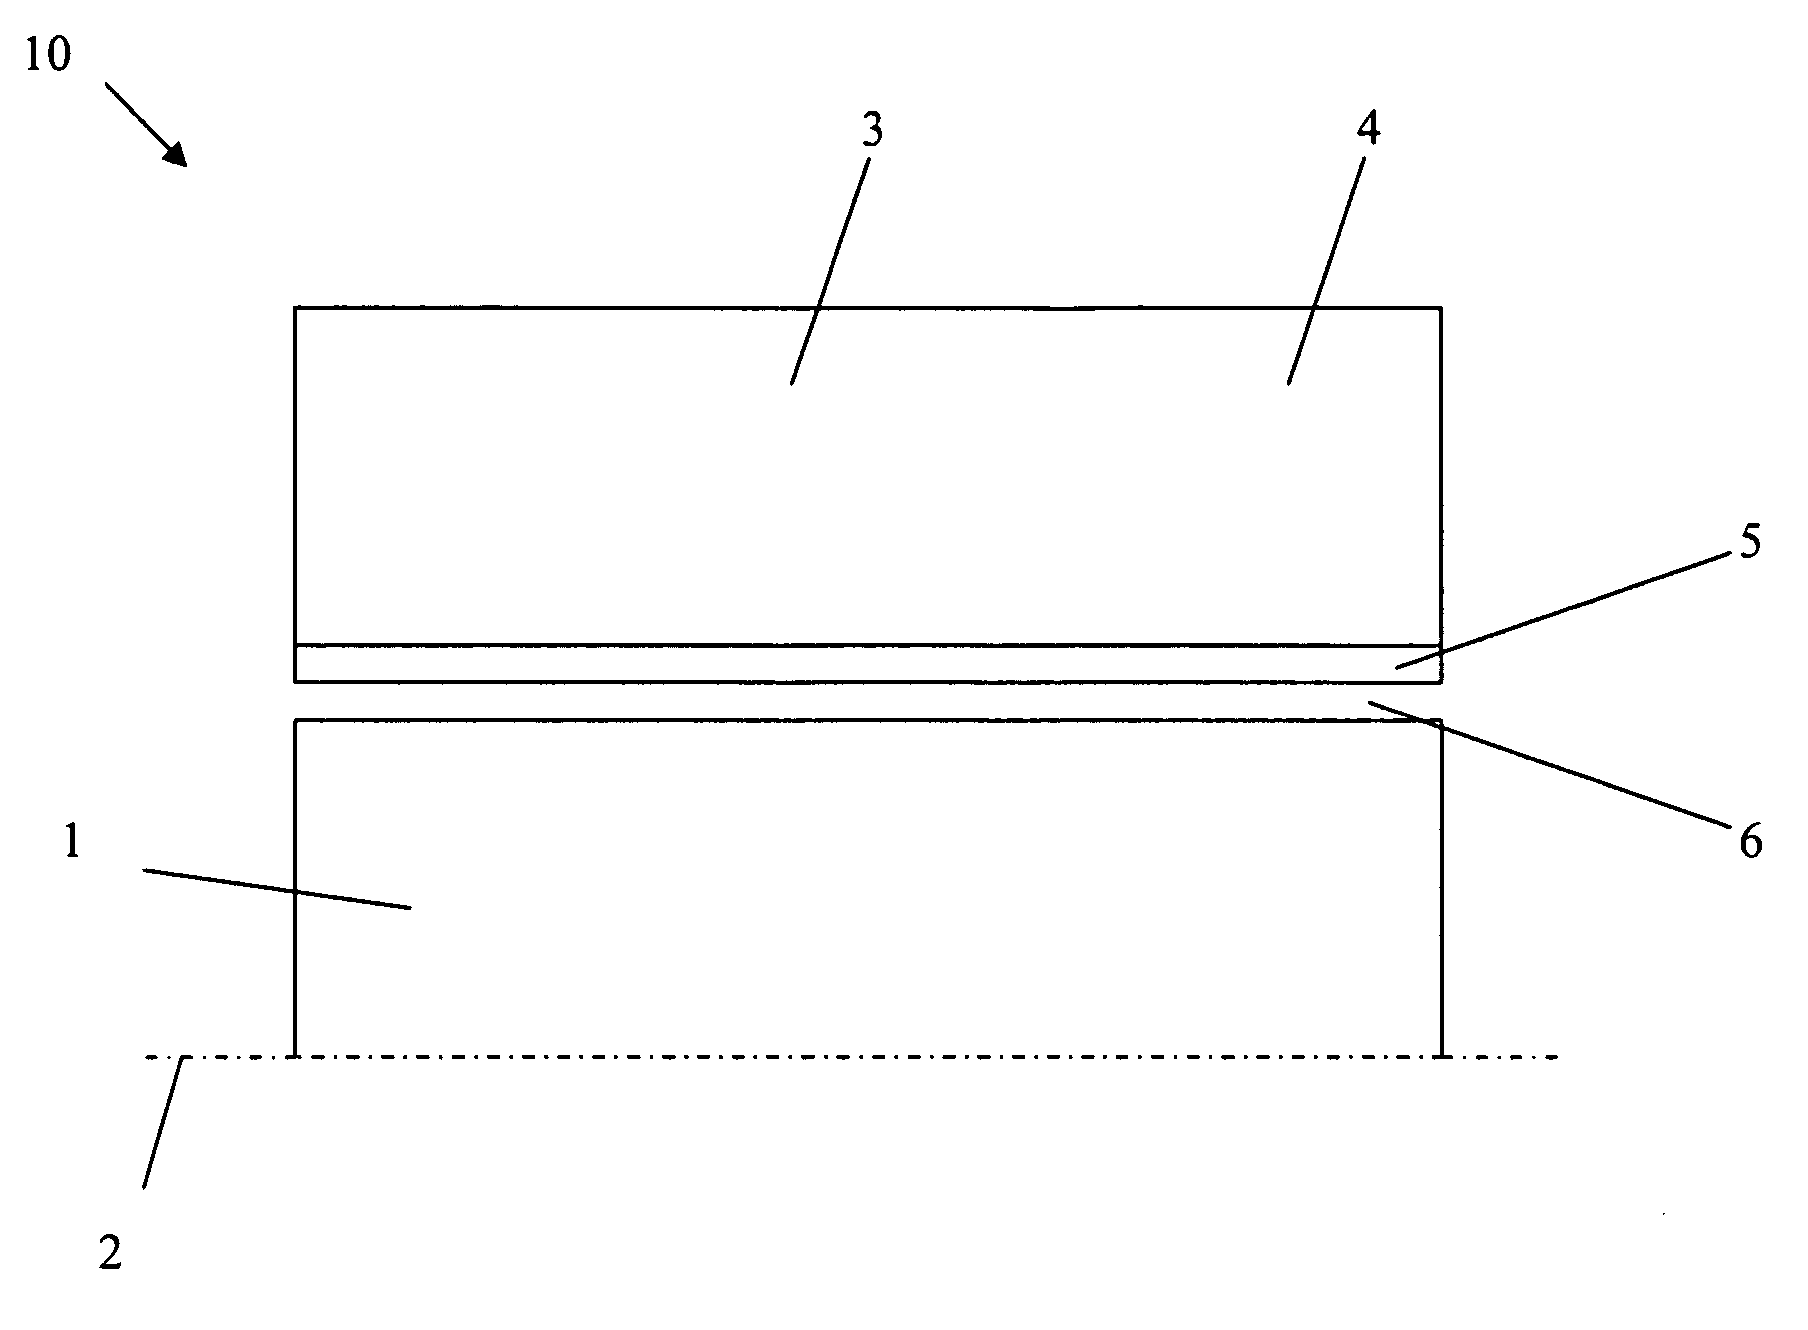 Rotor-stator device having an abradable coating film